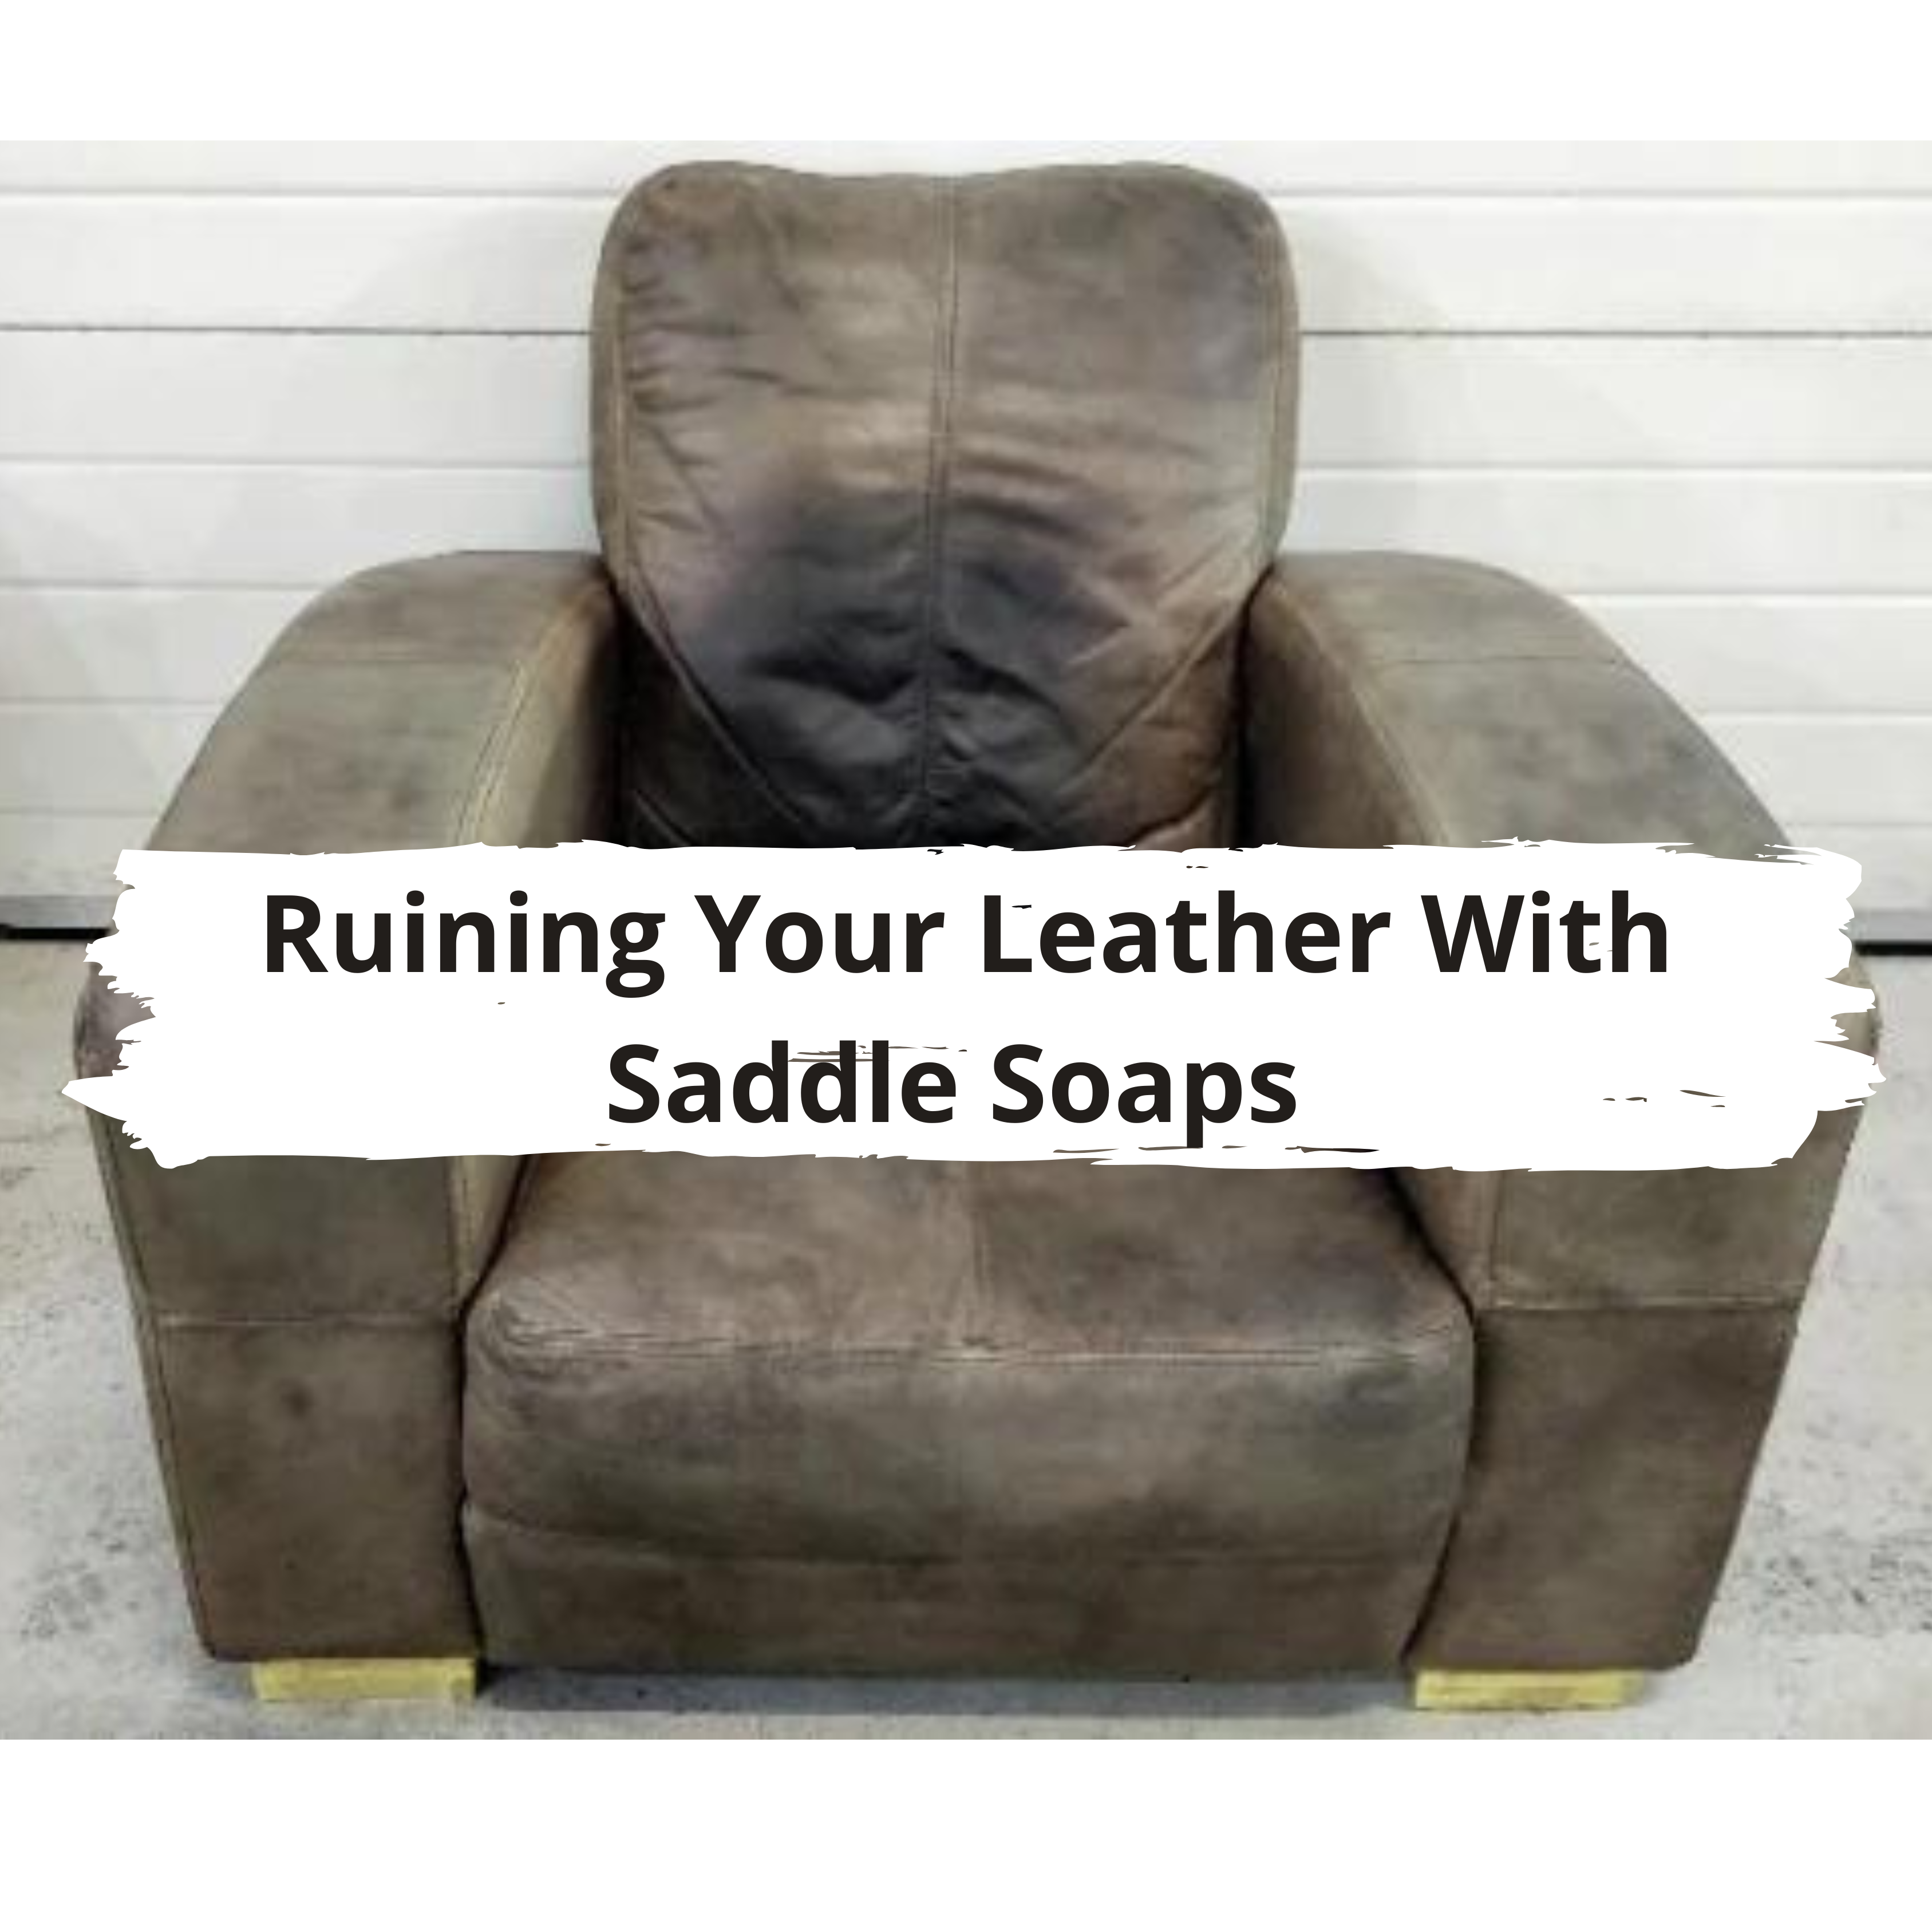 Saddle Soap Dangers Leather Cleaning